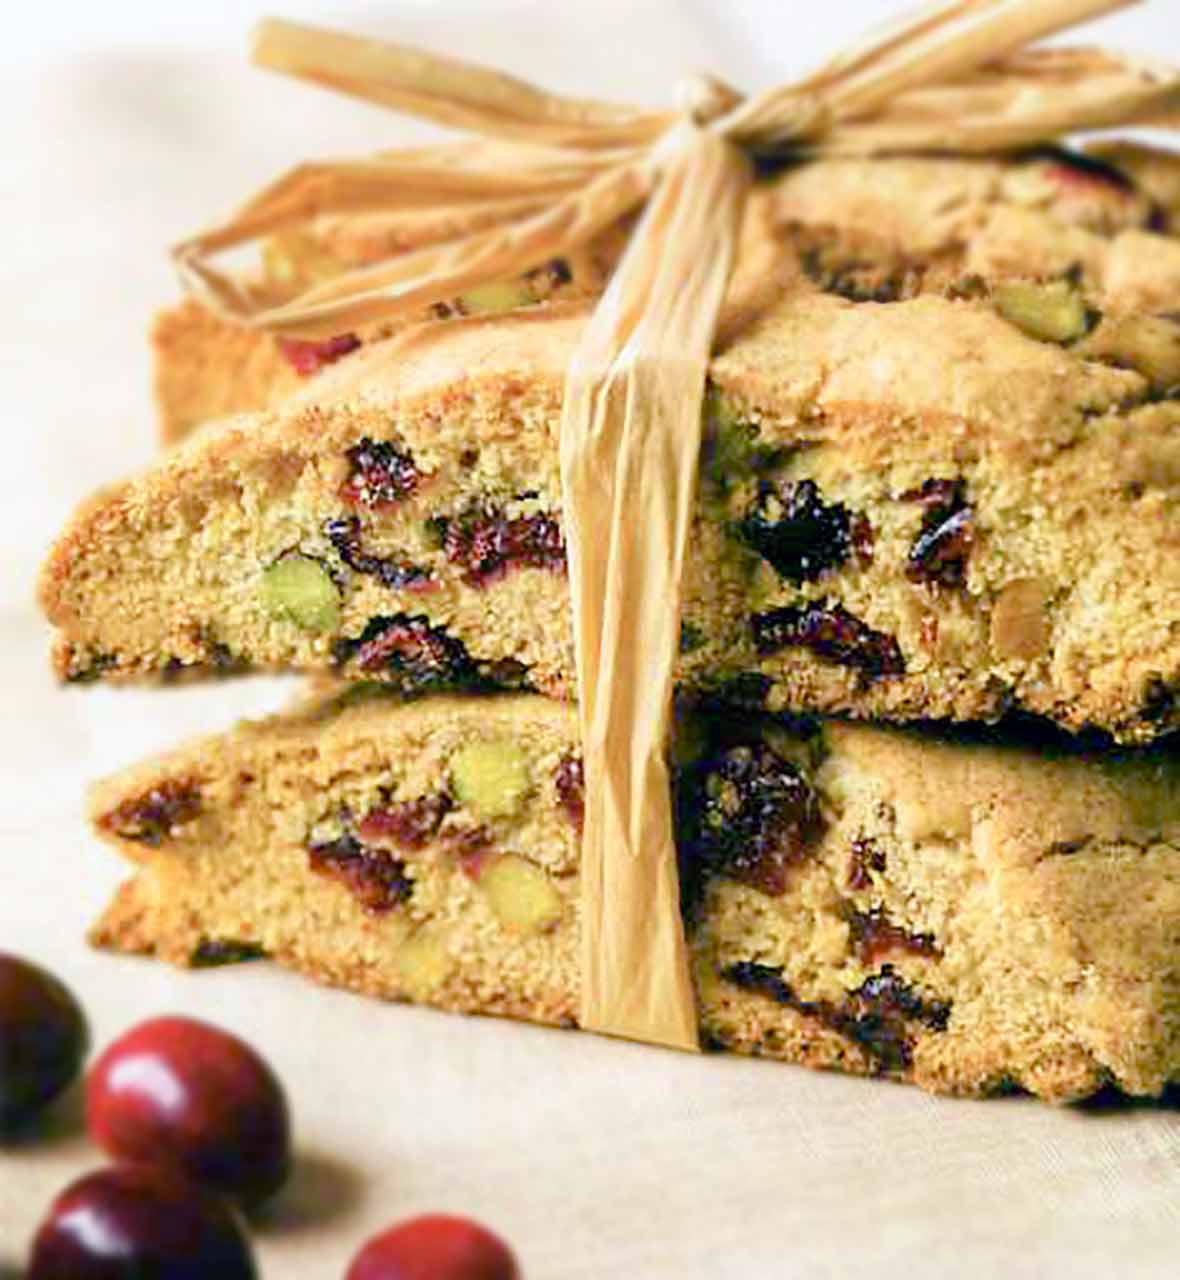 Several cranberry pistachio biscotti cookies tied together with raffia